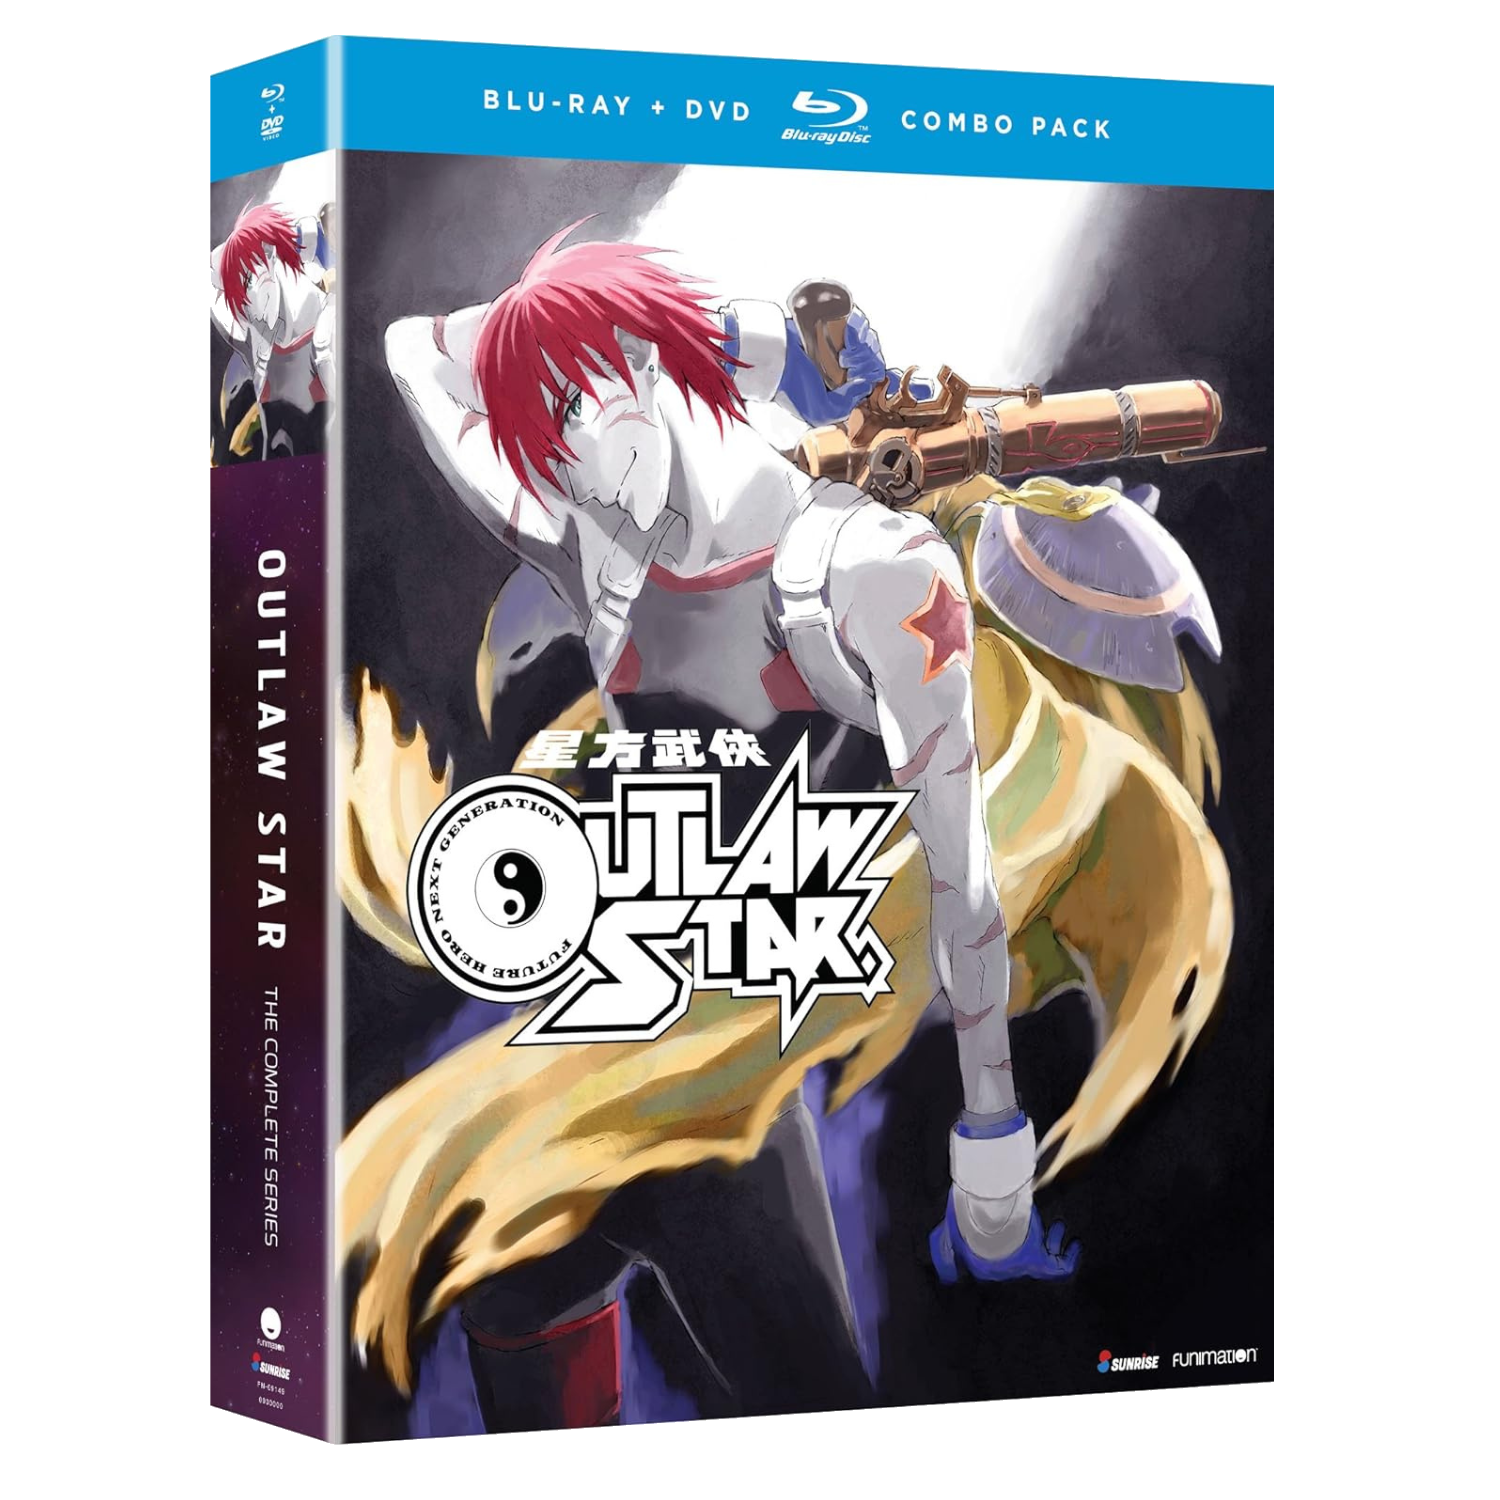 The complete series of Outlaw Star on Blu-ray